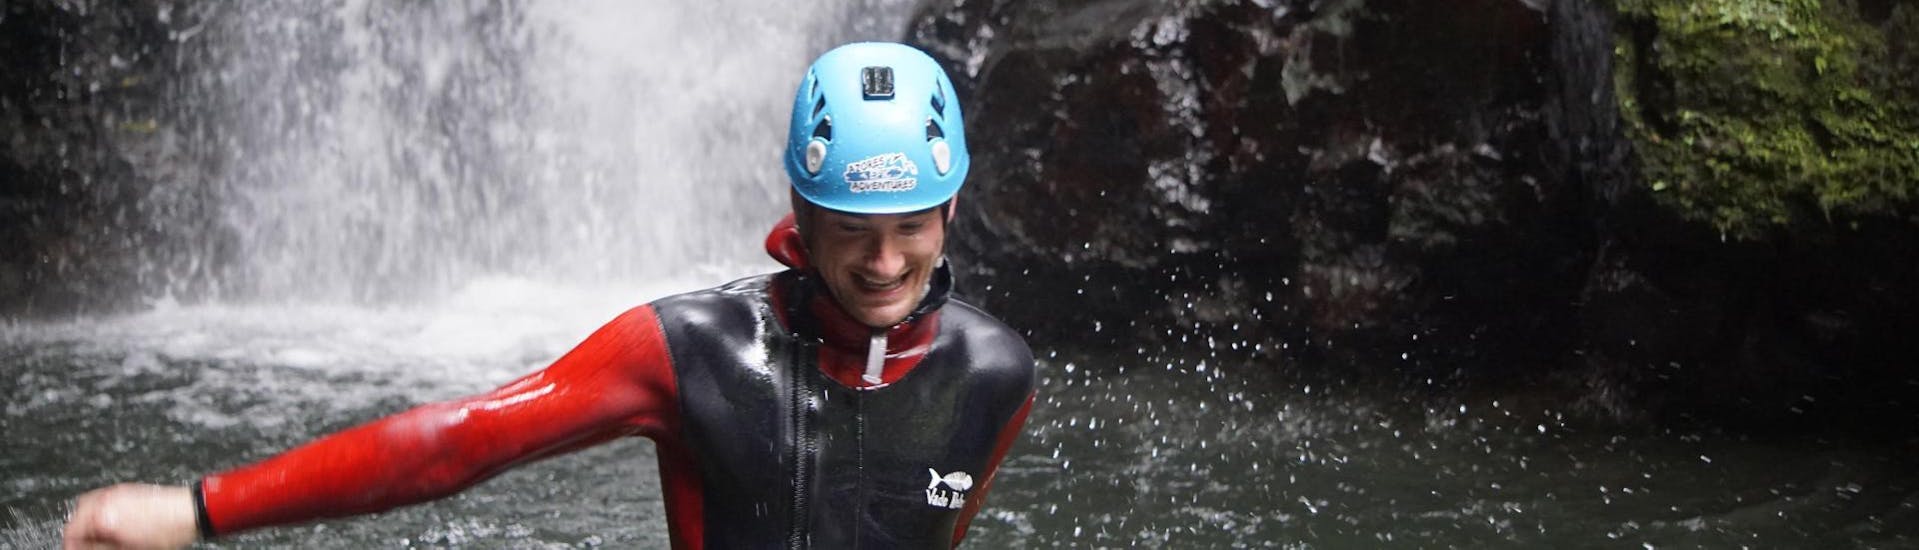 During the Canyoning "Epic" in Ribeira dos Caldeirões, a happy man is running with joy towards a experienced canyoning guide from Azores Epic Adventures.